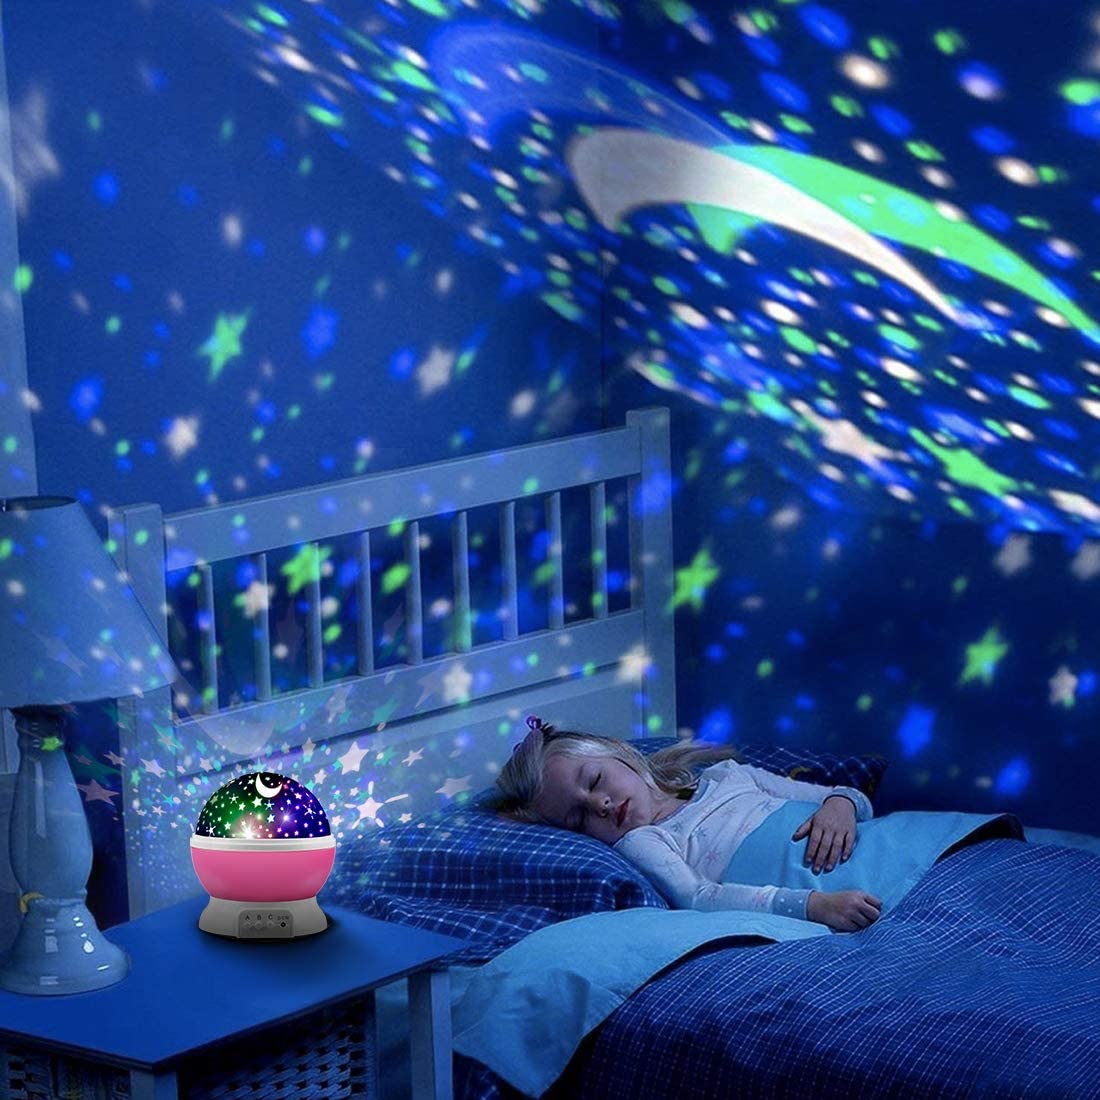 LED-Starry-Projector-Lamp-Baby-Night-Light-USB-Romantic-Rotating-Moon-Cosmos-Sky-Star-Projection-Lam-1937902-8